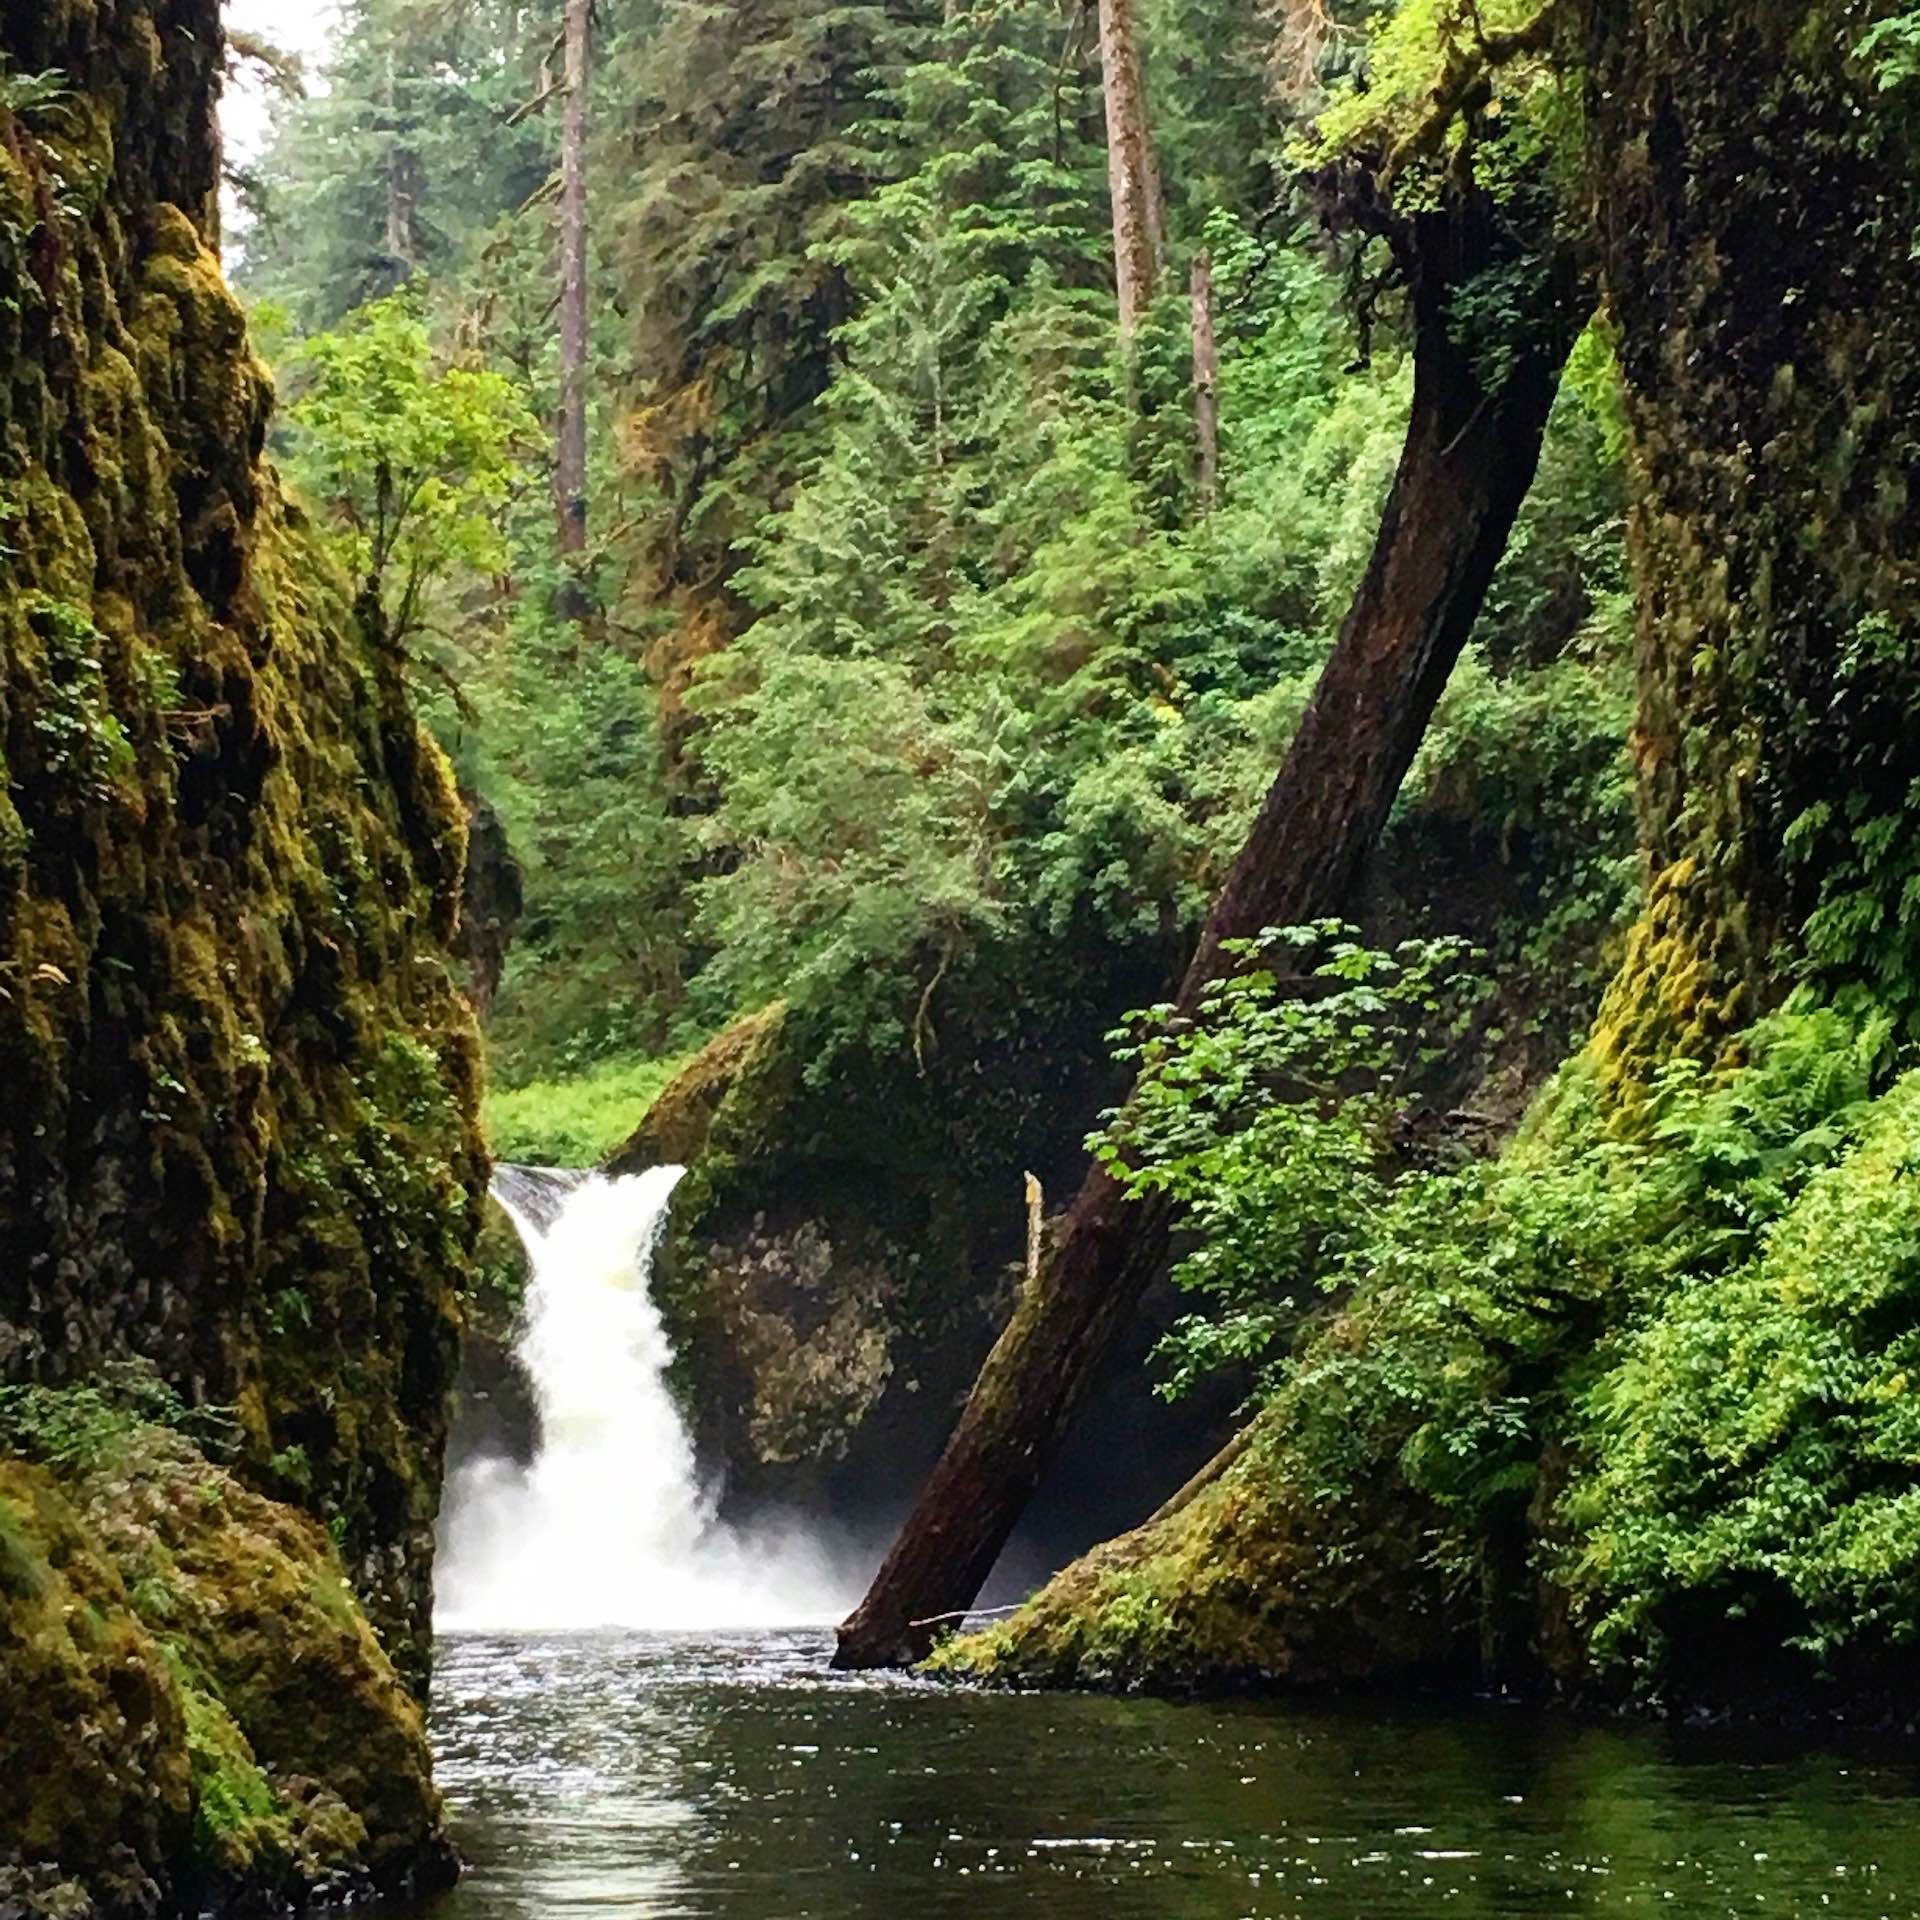 Punch Bowl Falls amidst all the greenery